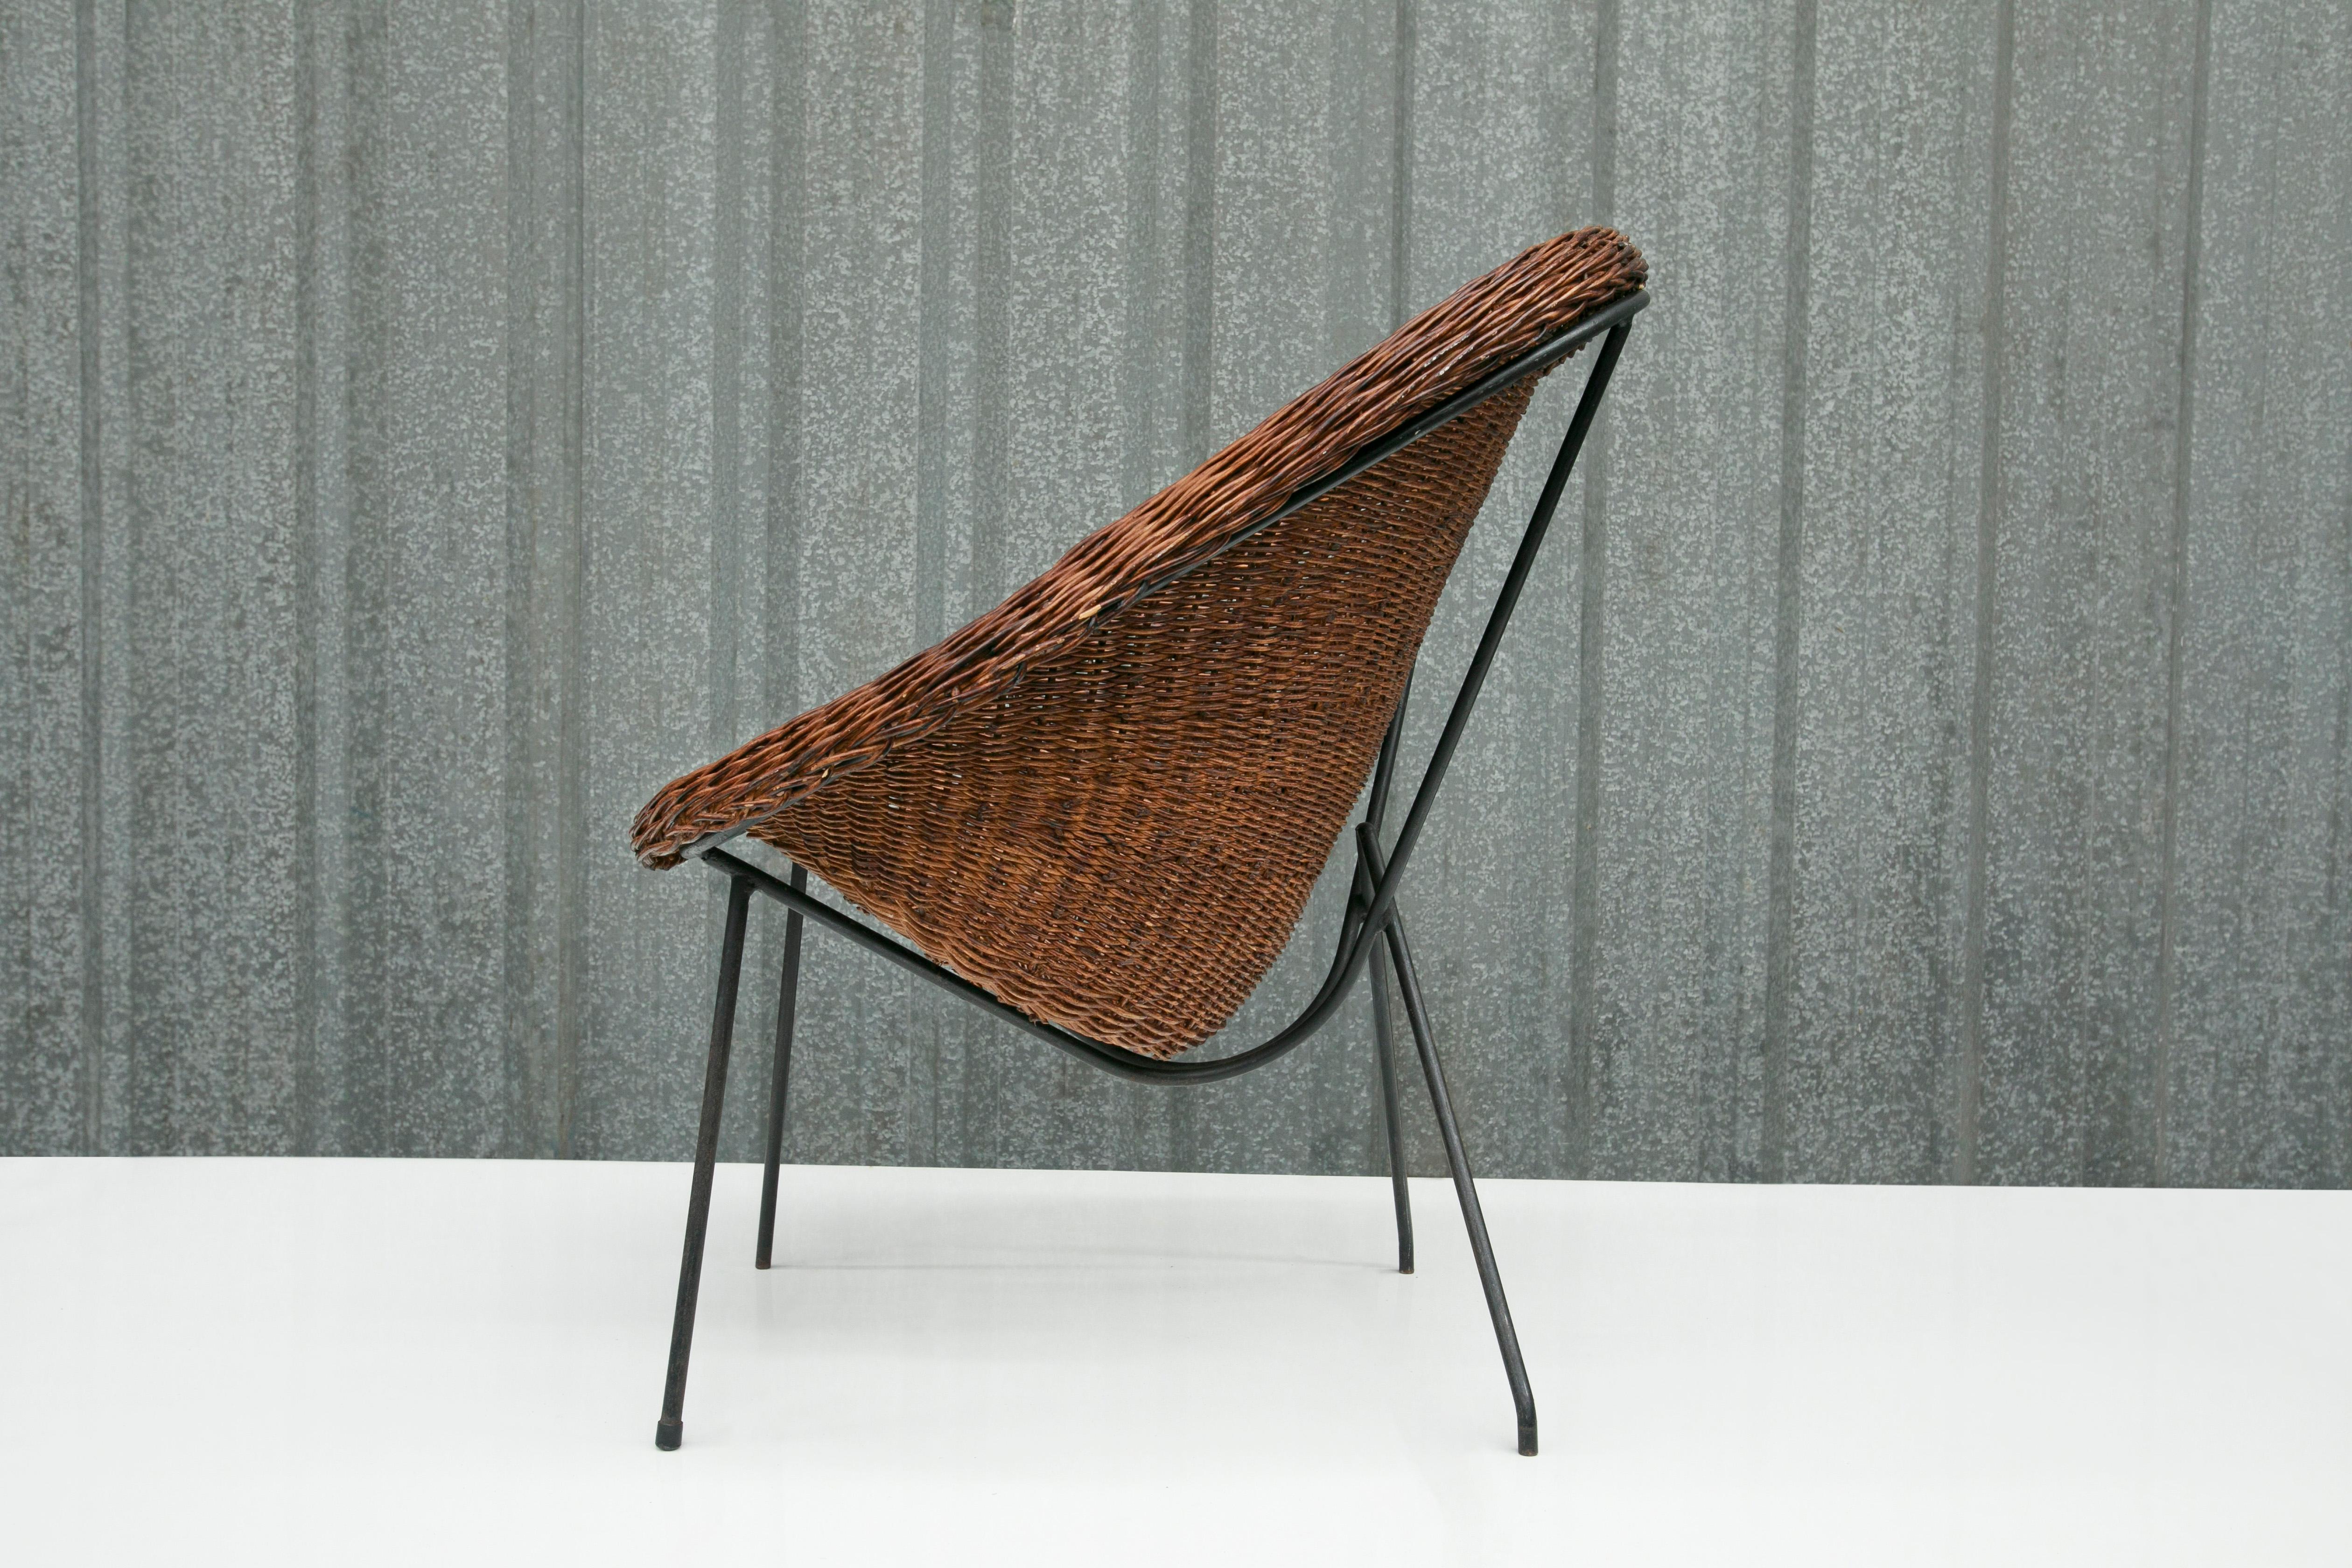 Brazilian Modern Chair in Cane & Iron by Carlo Hauner & Martin Eisler, 1955 In Good Condition For Sale In New York, NY